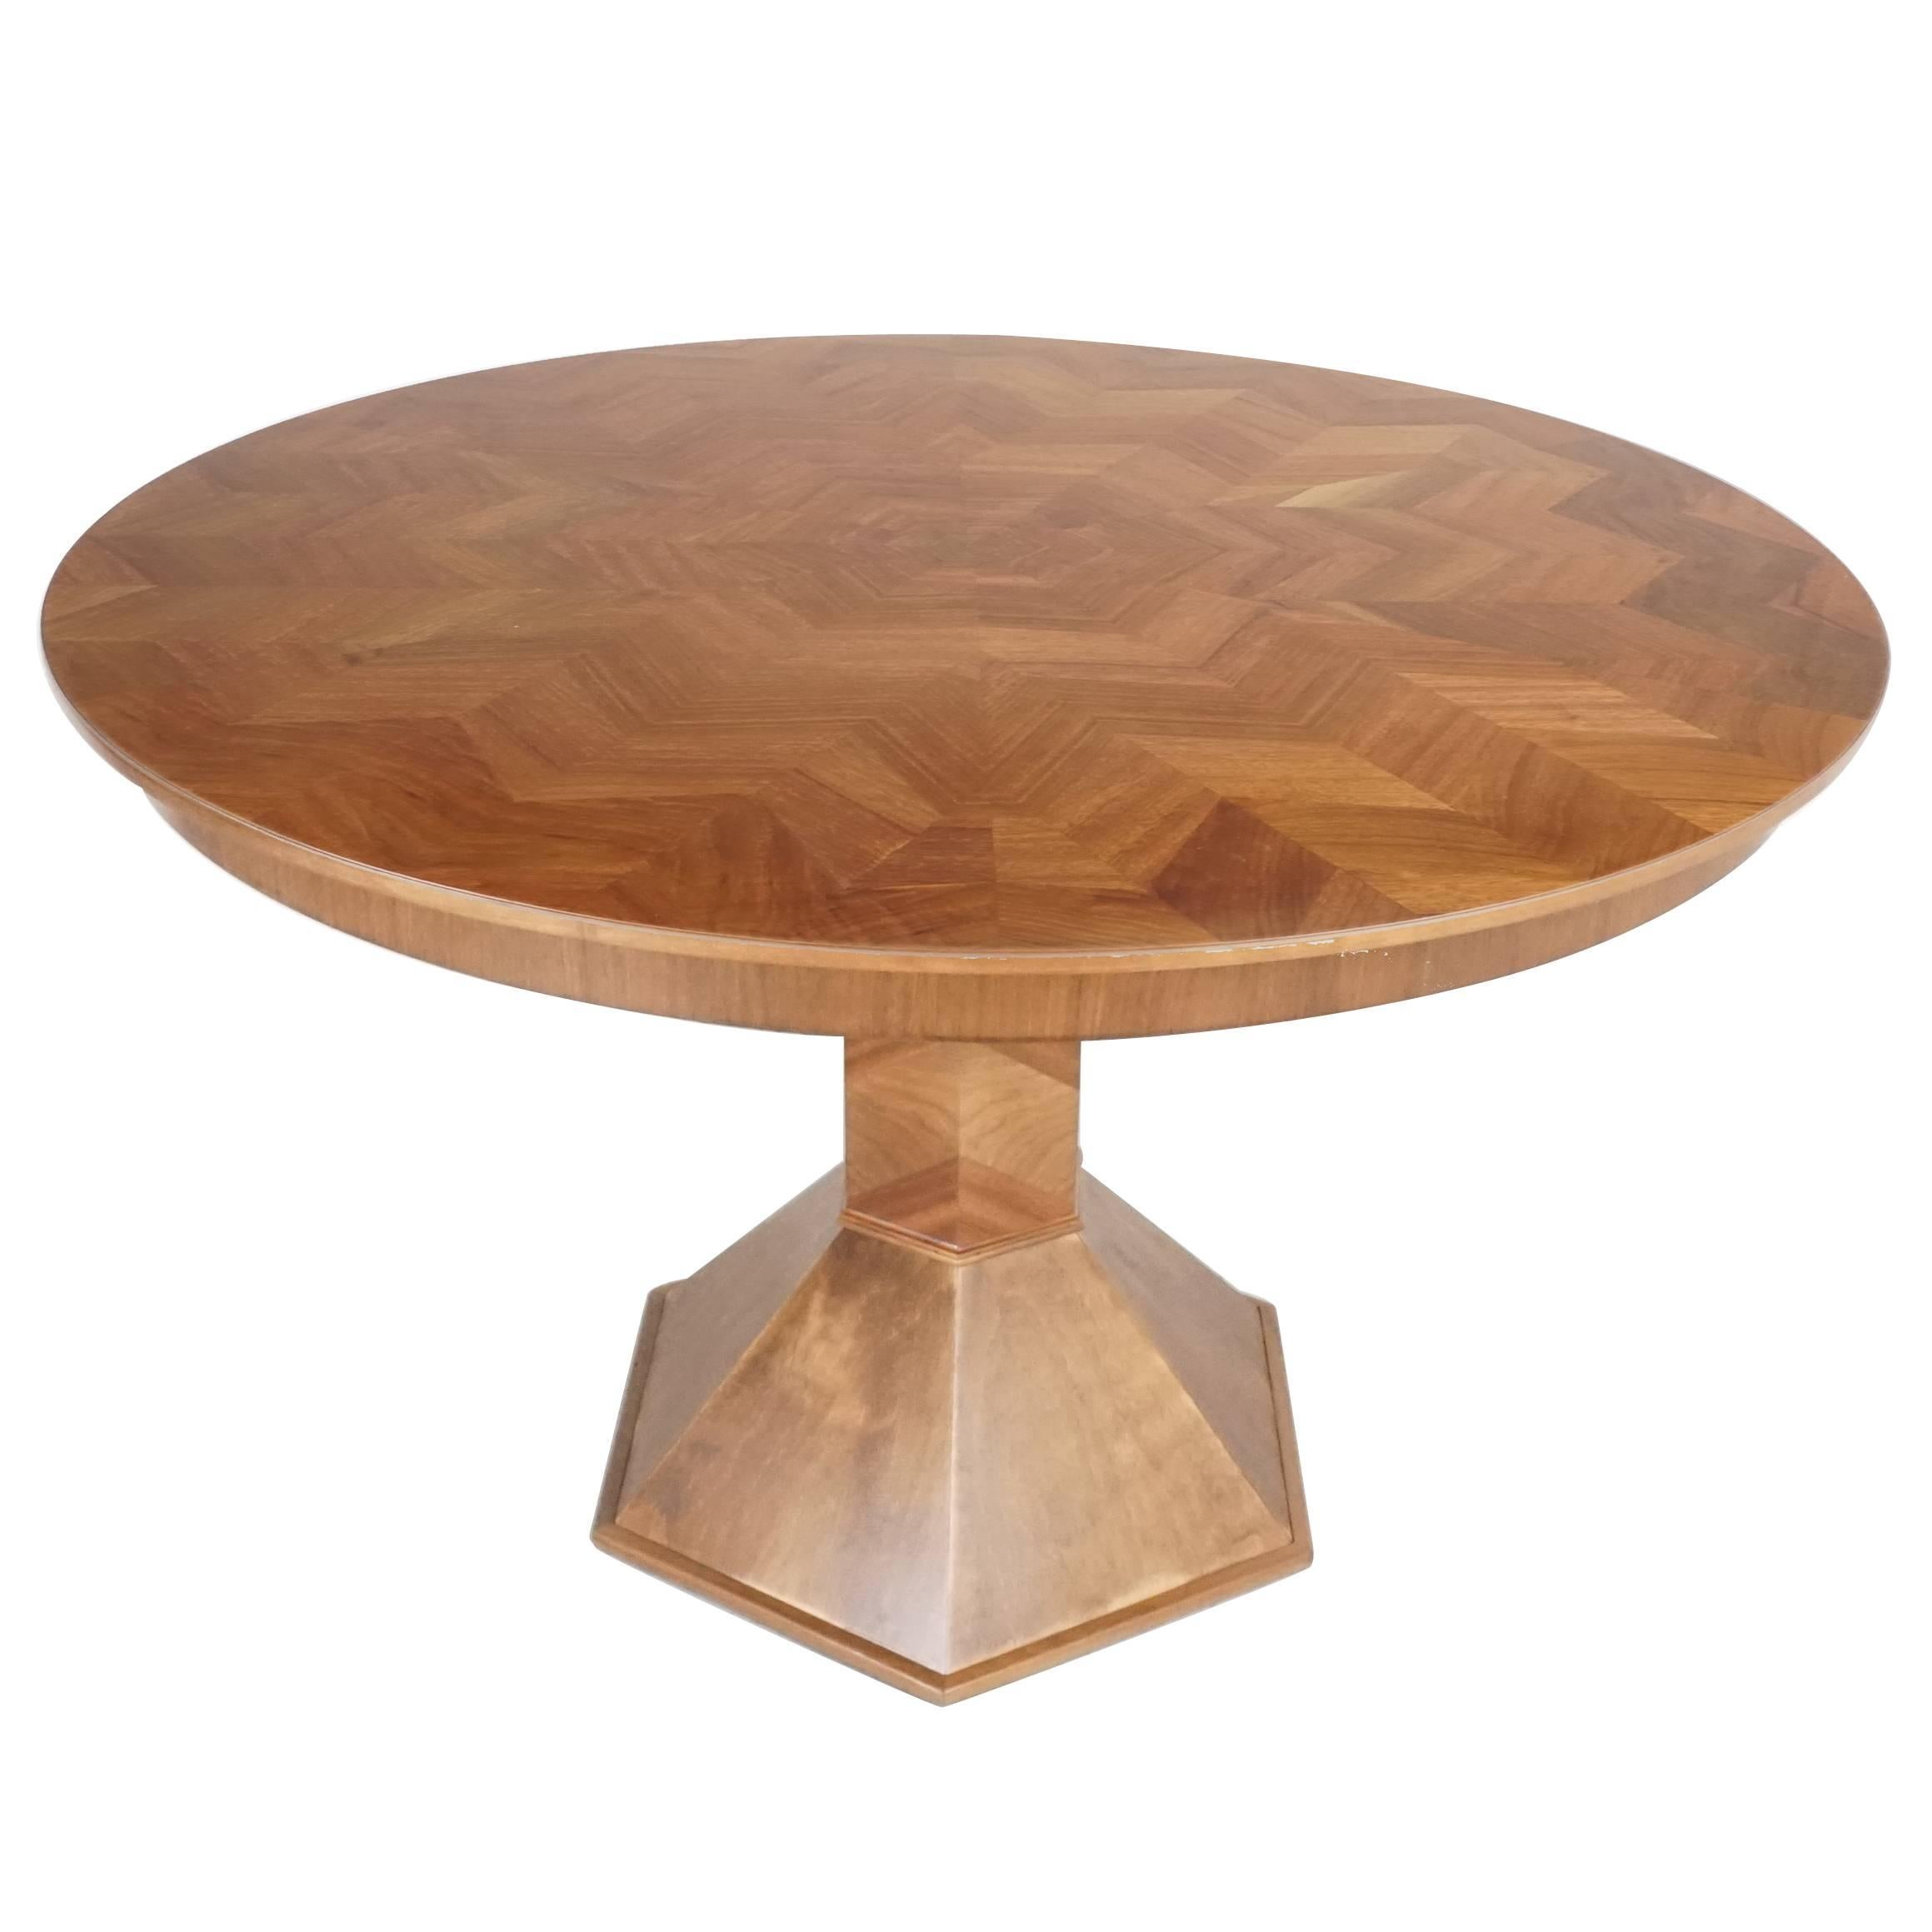 Italian Dining Table with Inlay Parquetry